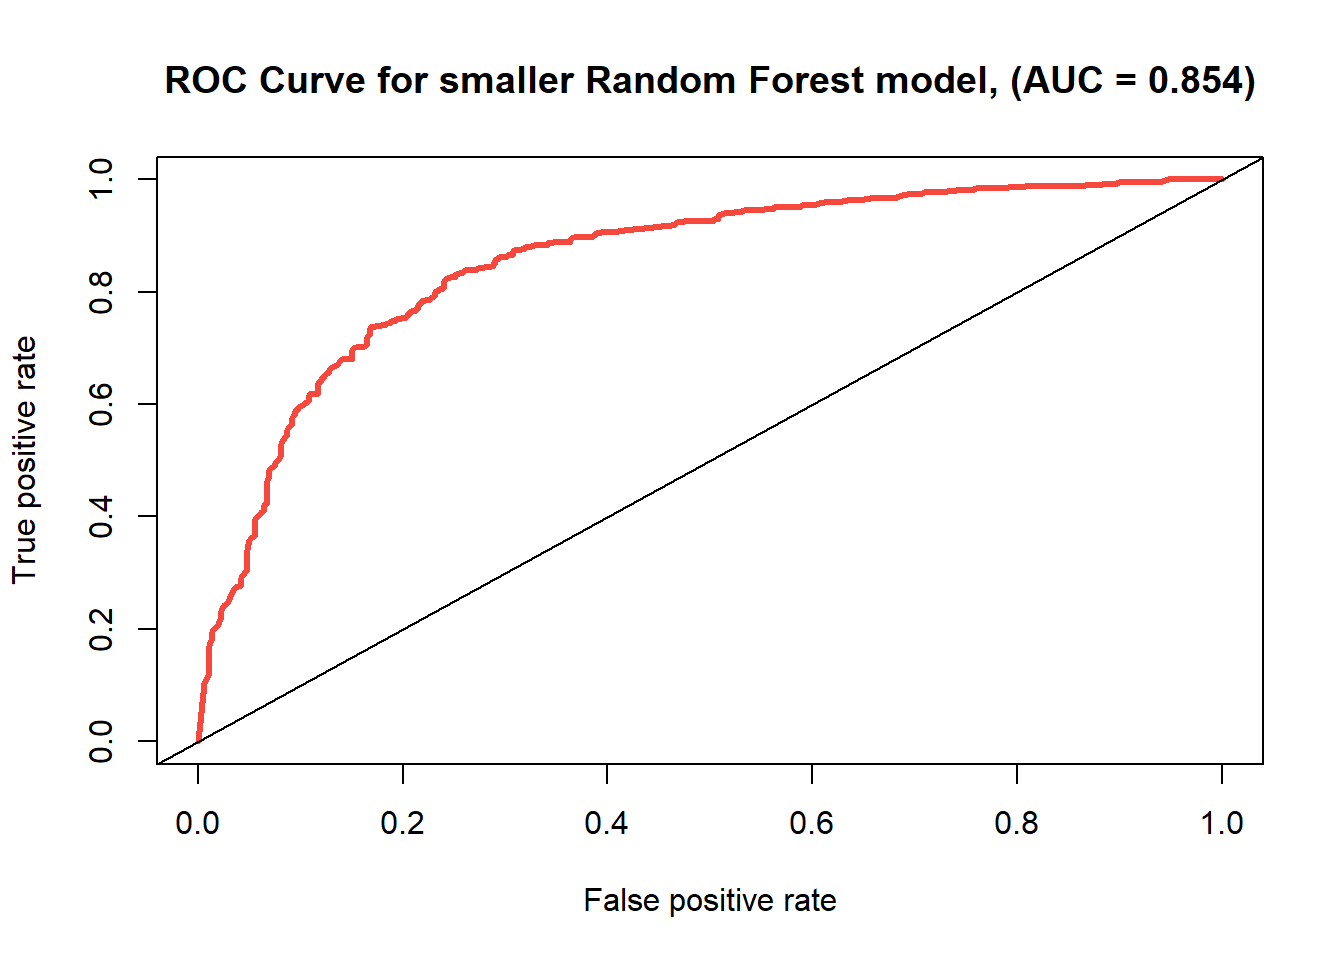 ROC curve for the random forest model using predictors 'free sulfur dioxide', 'volatile acidity', and 'alcohol'.